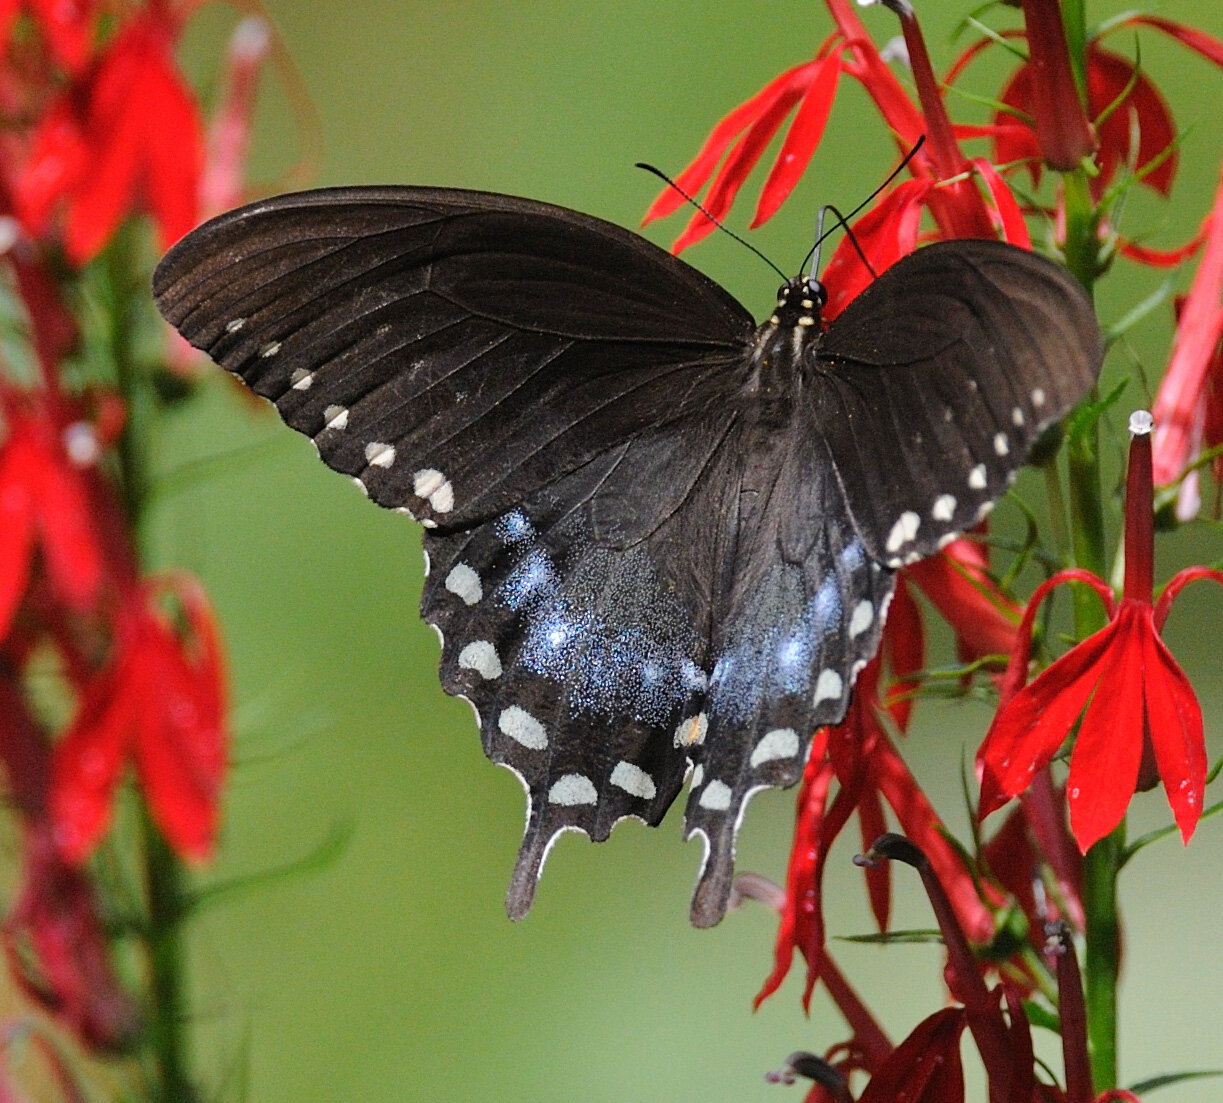 This spicebush swallowtail, as well as the black swallowtail and some dark-colored tiger swallowtails (the females), might have spot patterns that make them resemble mourning cloaks from a distance, but a closer inspection will show that all swallowtails have spots lining the rear fringe of the wing. The mourning cloak has solid-yellow fringe. Also, all the swallowtail species have a tail on each hindwing trailing edge. The mourning cloak has a small triangular bump on each trailing edge of the hindwing.